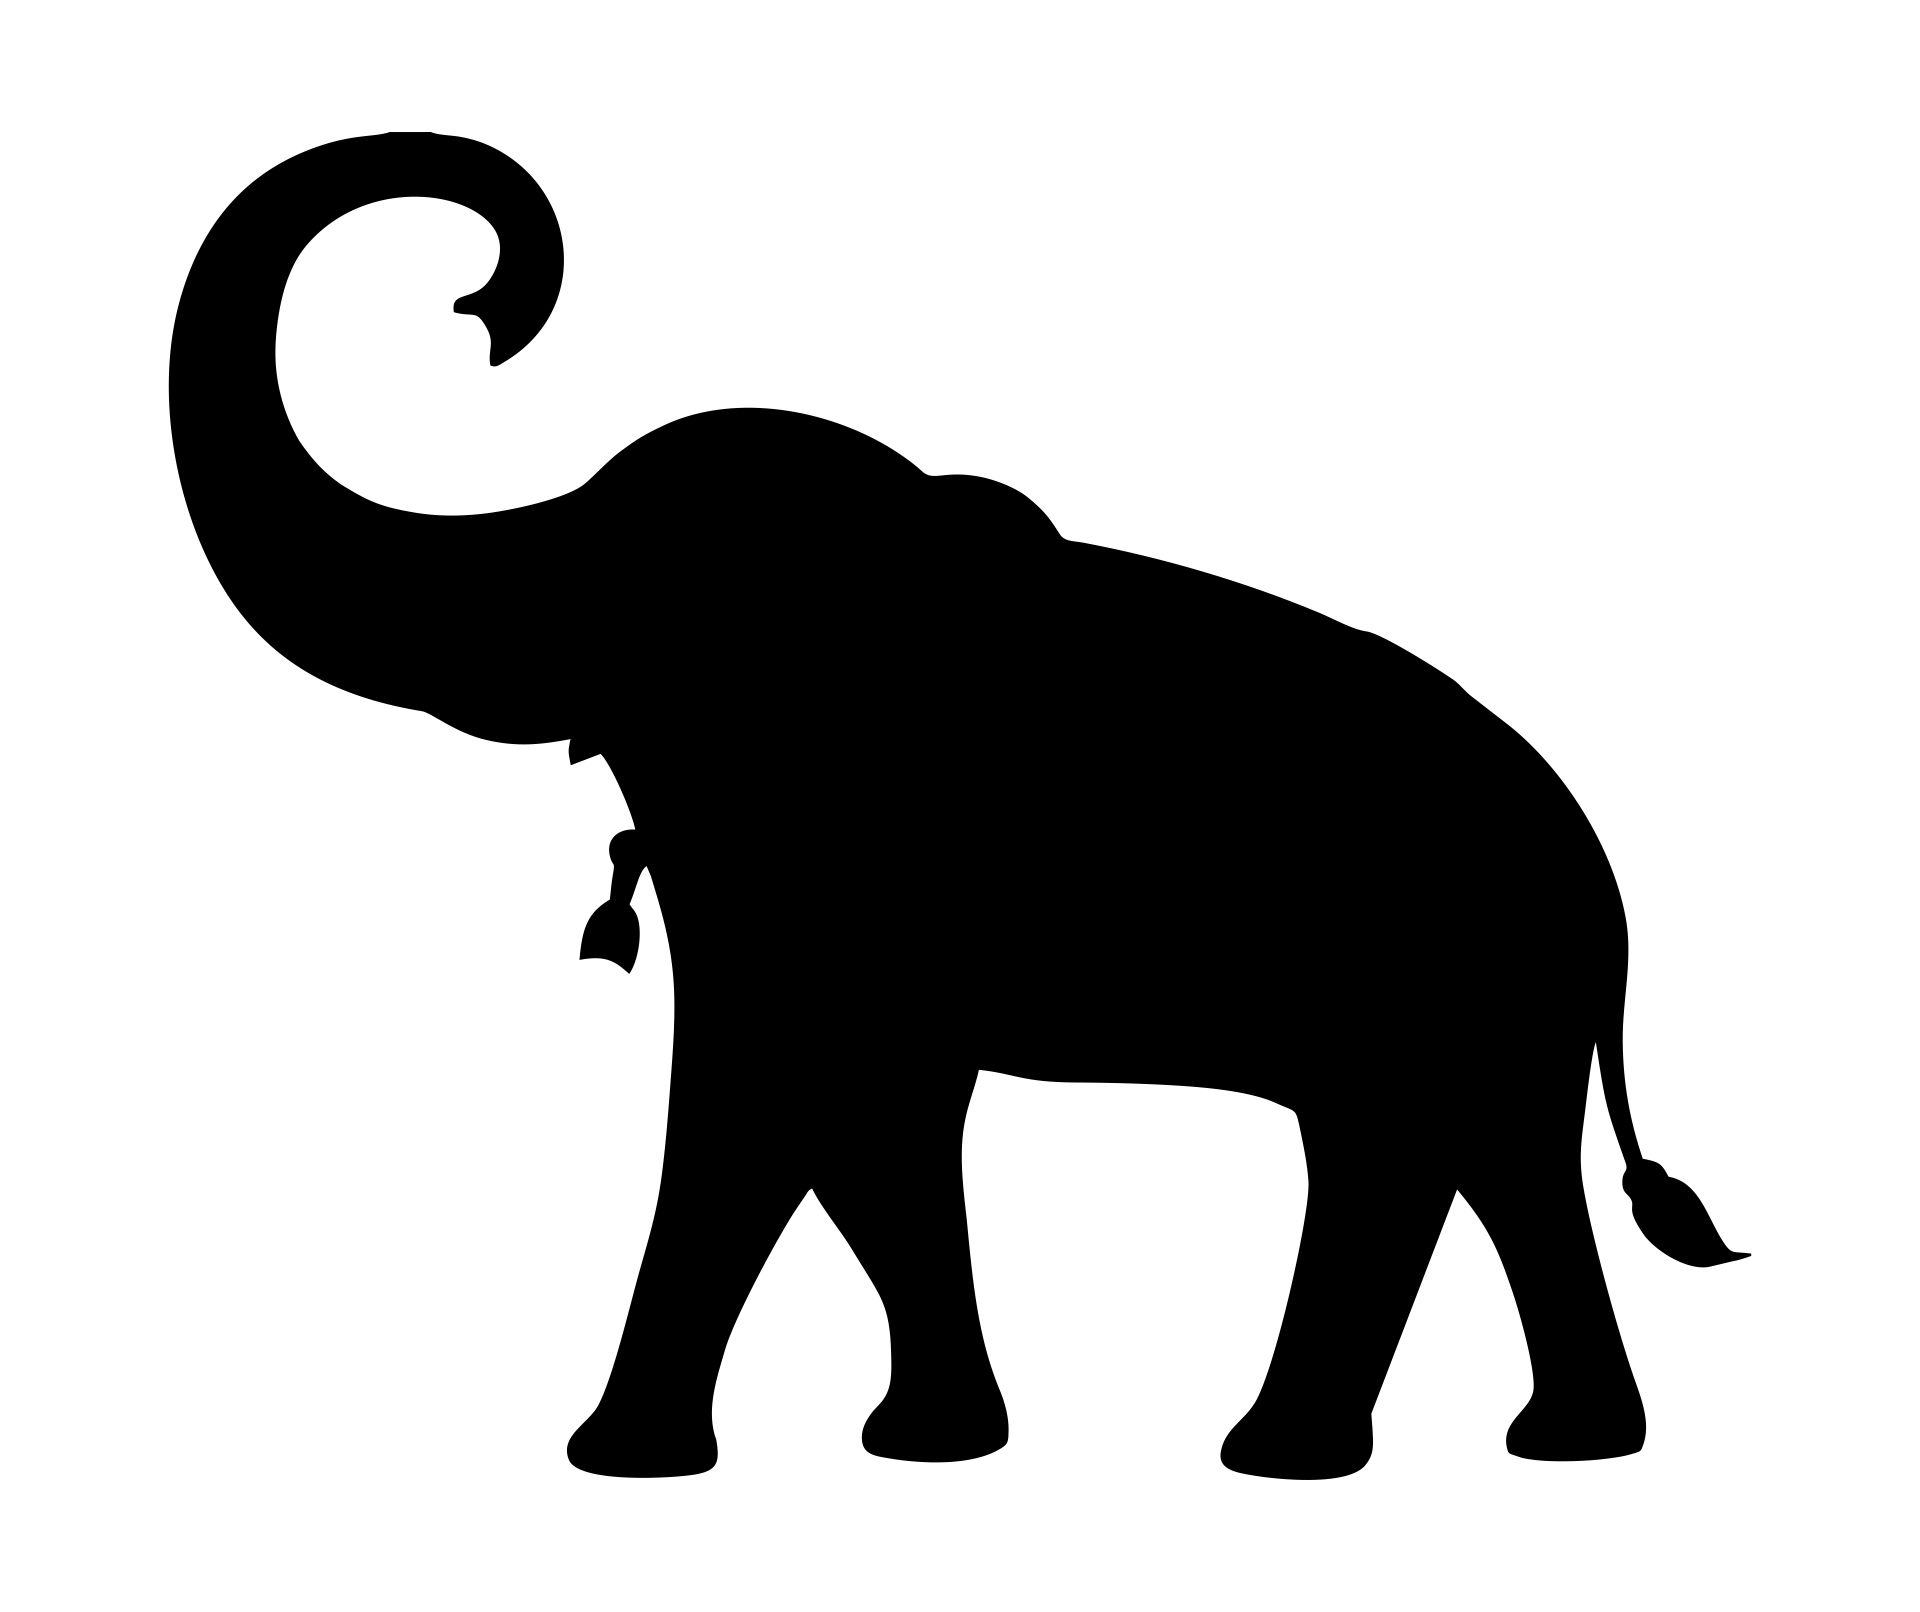 Elephant with Trunk Up Stencil